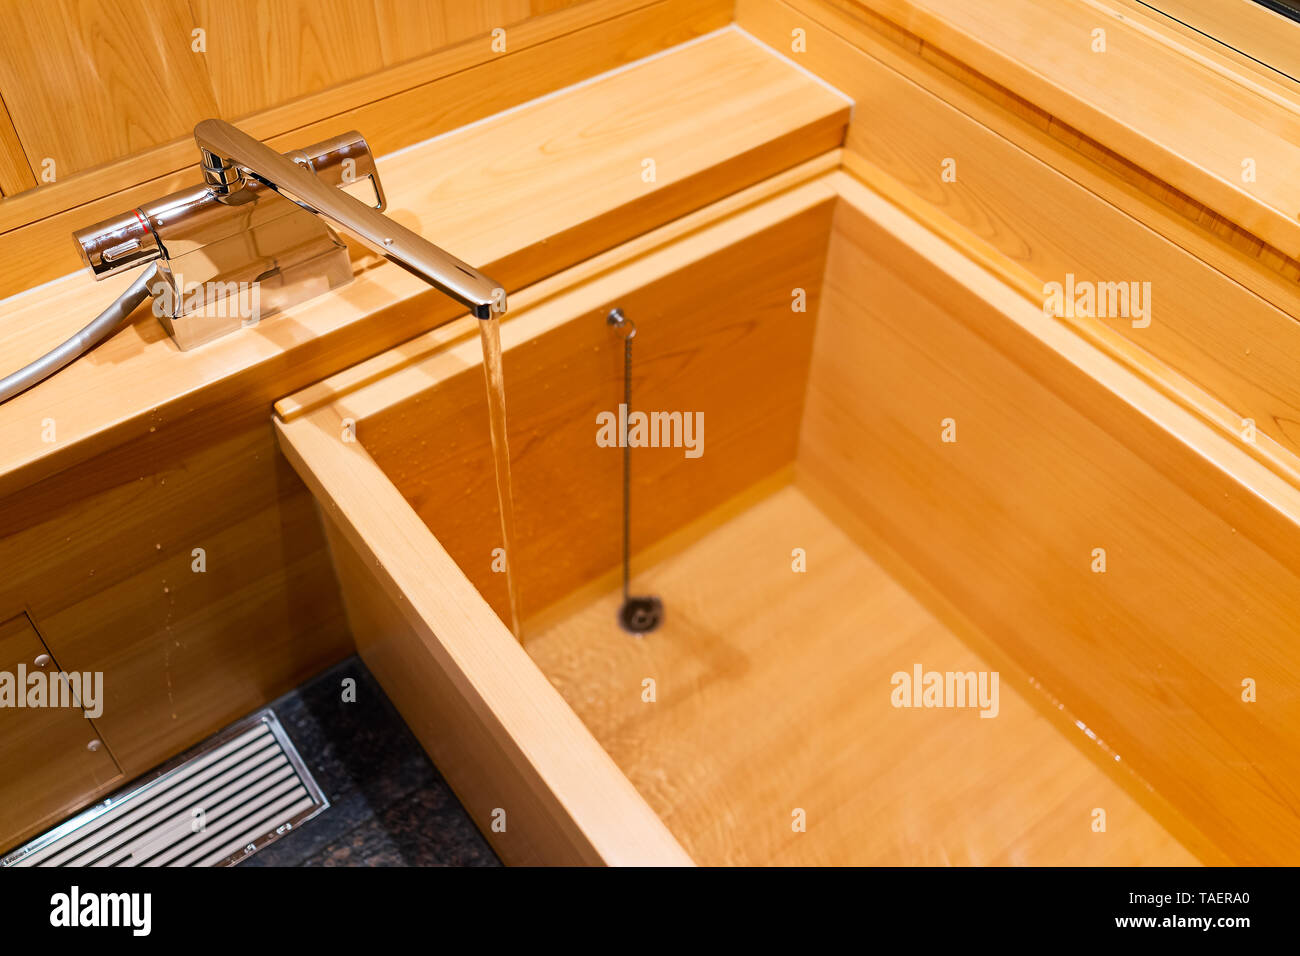 New clean cypress bathtub wooden traditional Japanese tub in home house or onsen hotel bathroom interior with nobody and running water in Japan Stock Photo